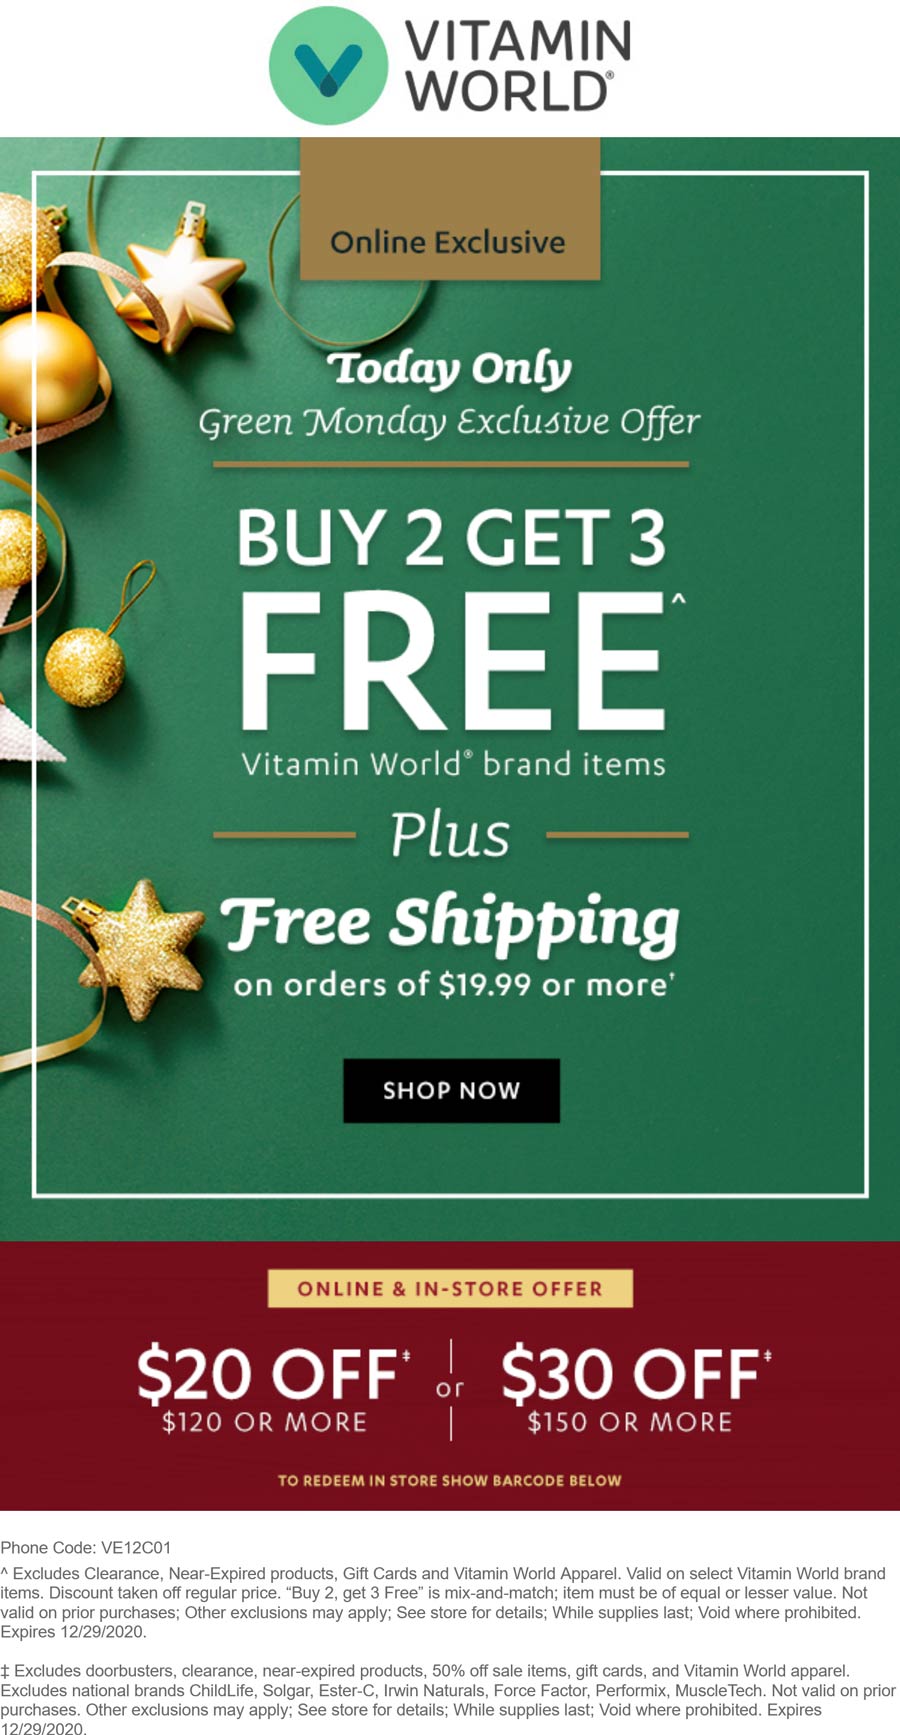 Vitamin World stores Coupon  3rd item free + $20 off $120 today at Vitamin World, or online via promo code VE12C01 #vitaminworld 